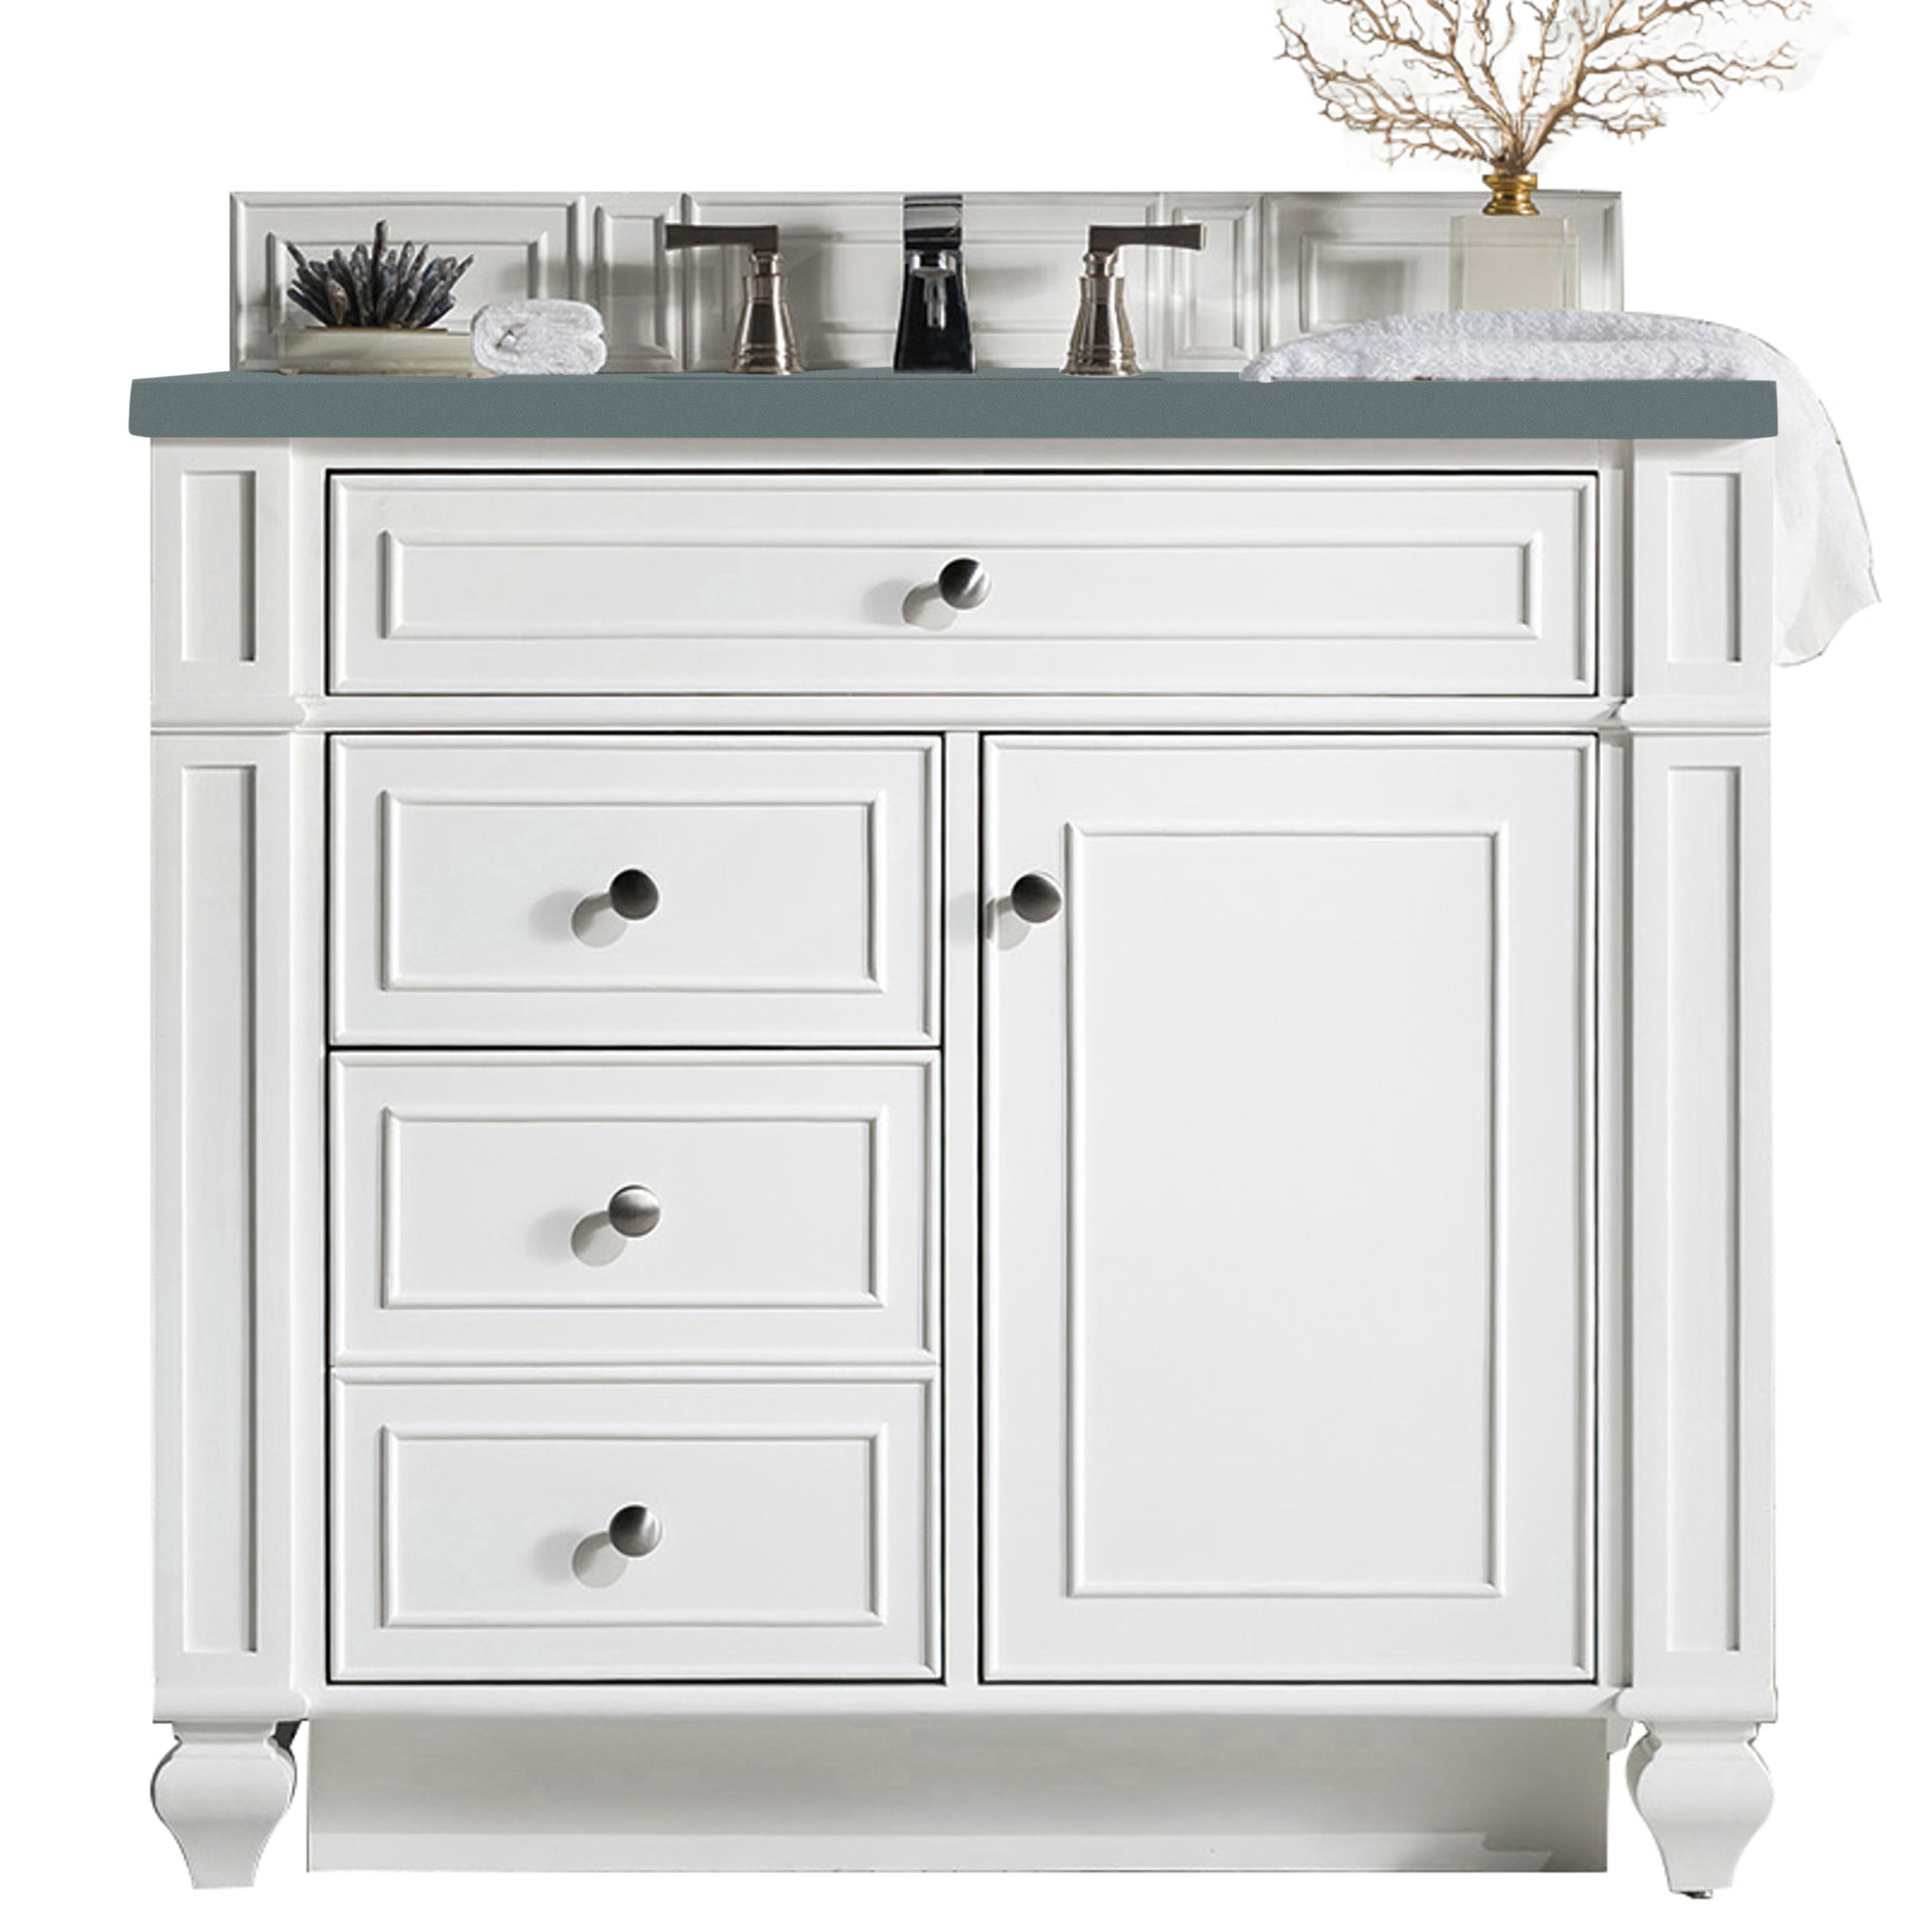 James Martin Vanities Bristol Collection 36 in. Single Vanity in Bright White with Countertop Options